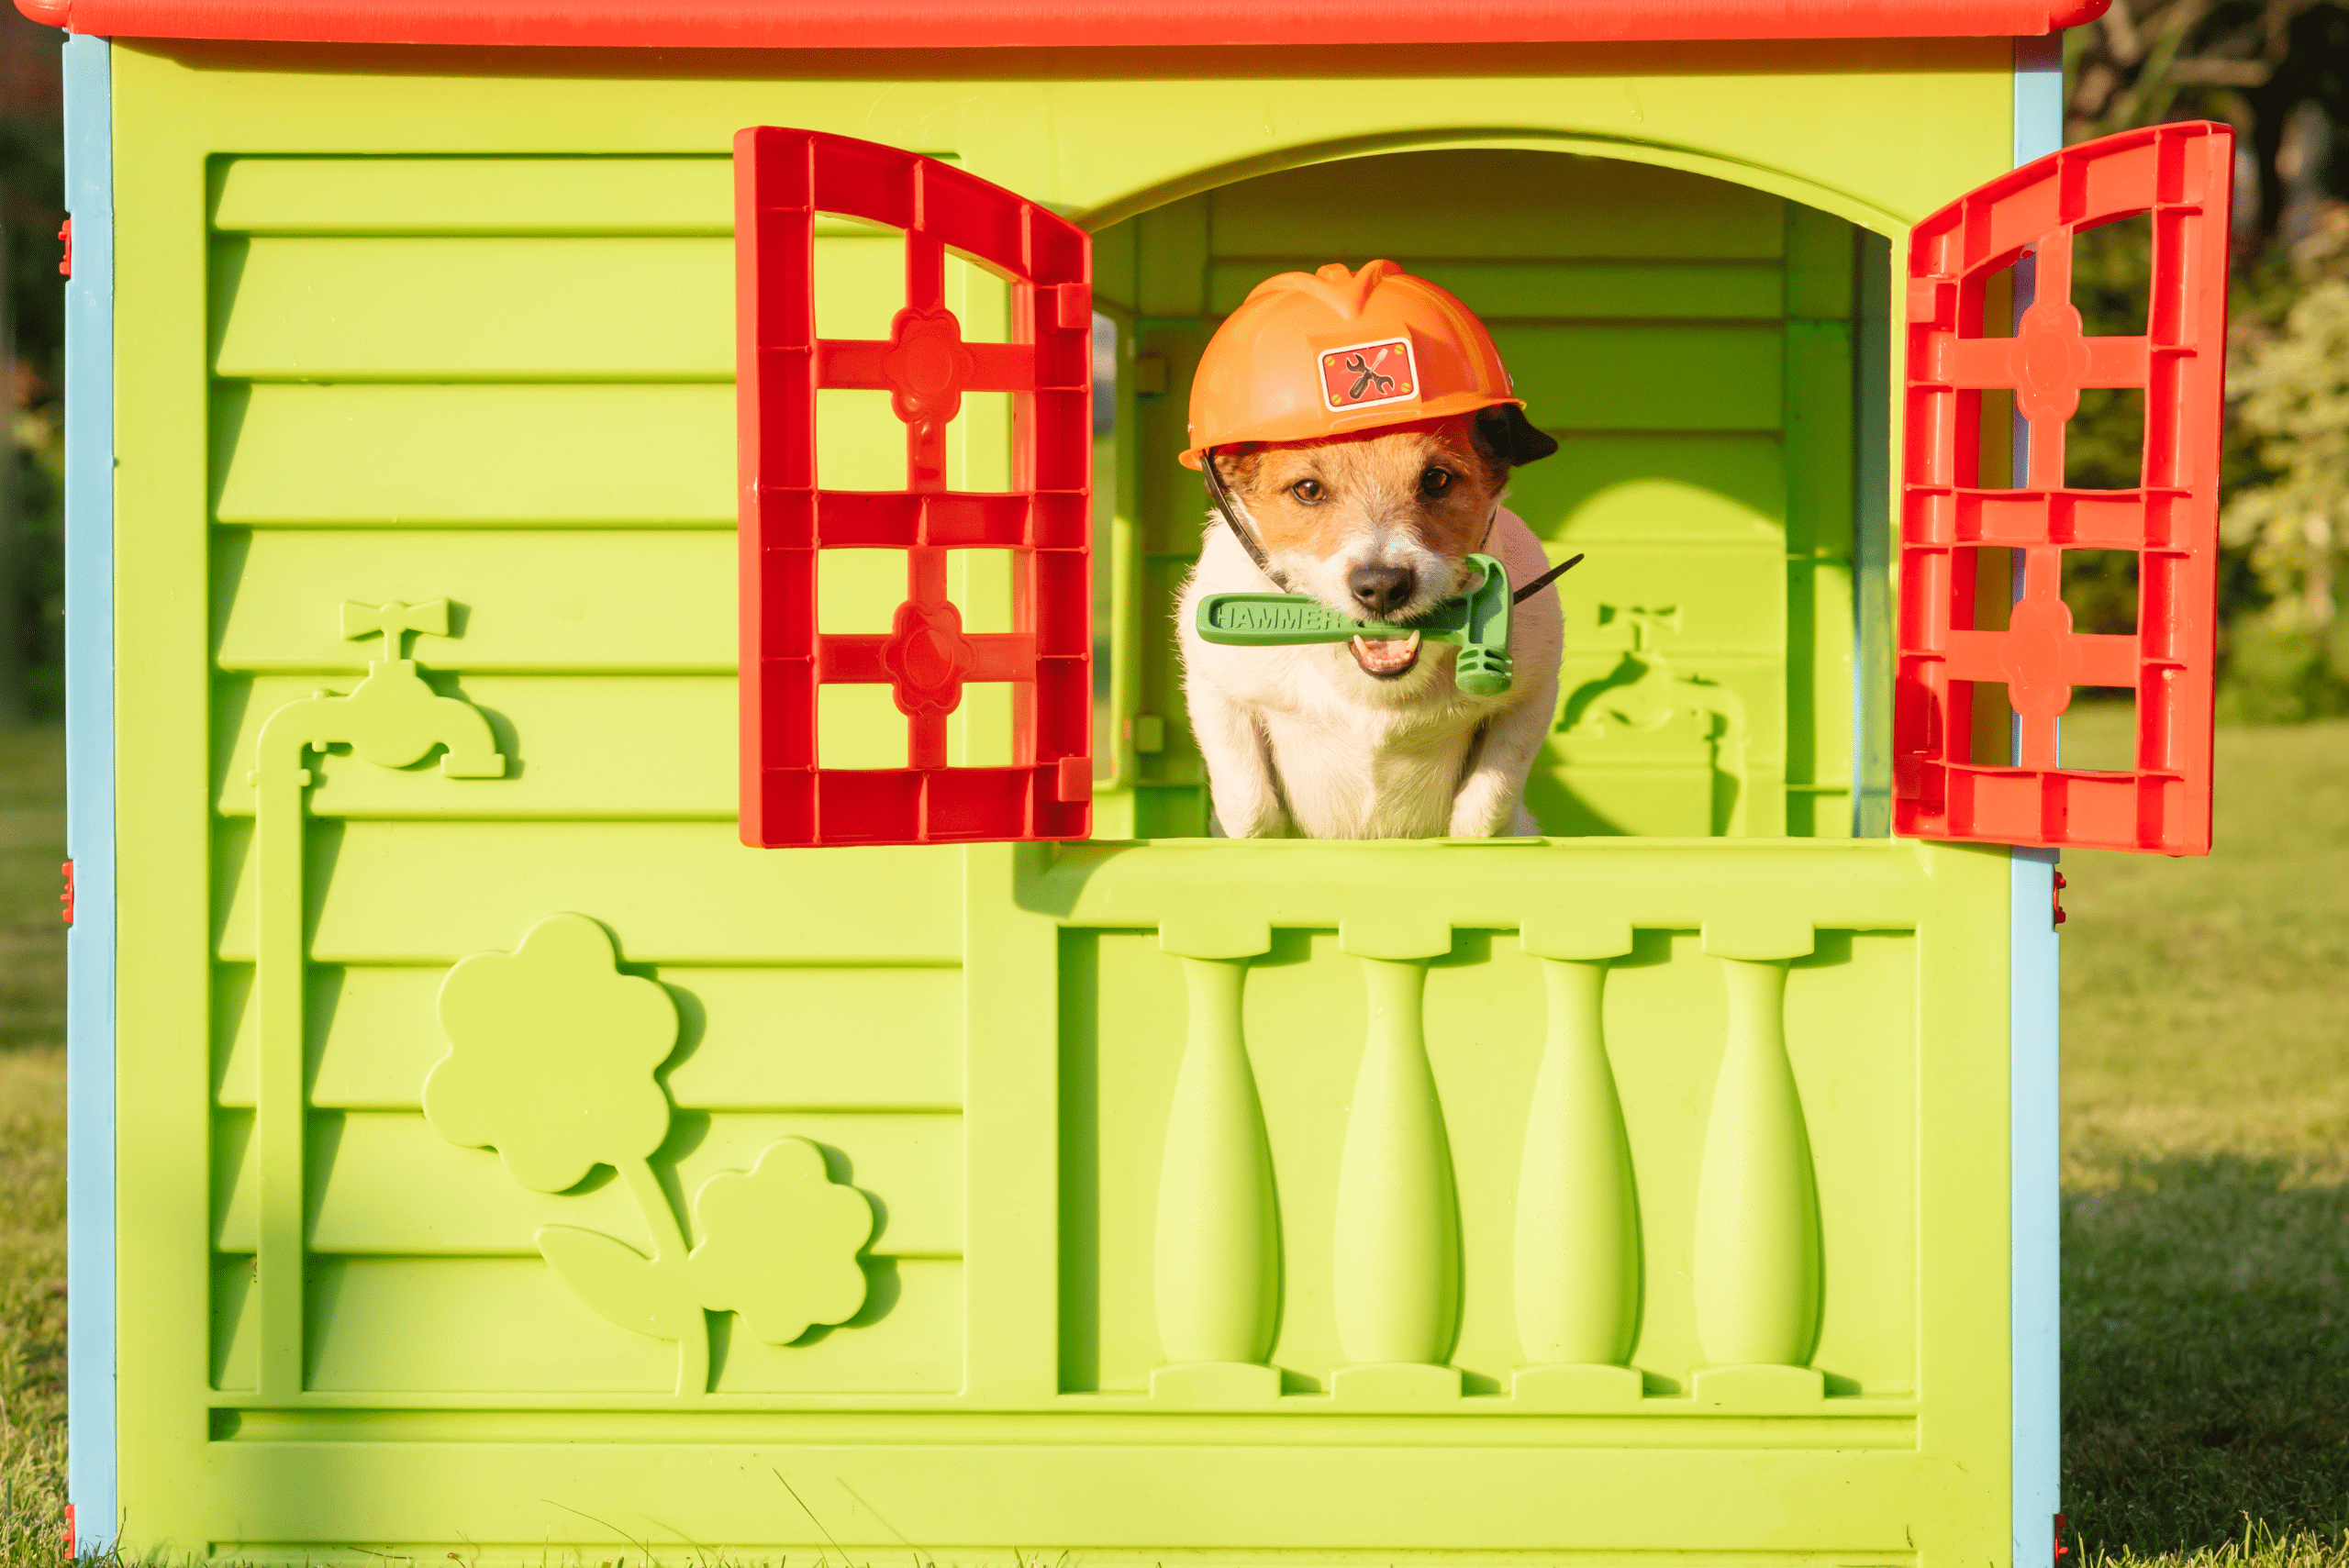 Bright yellow and orange plastic dog house with dog peaking through the window wearing a hardhat and holding a hammer in its mouth.